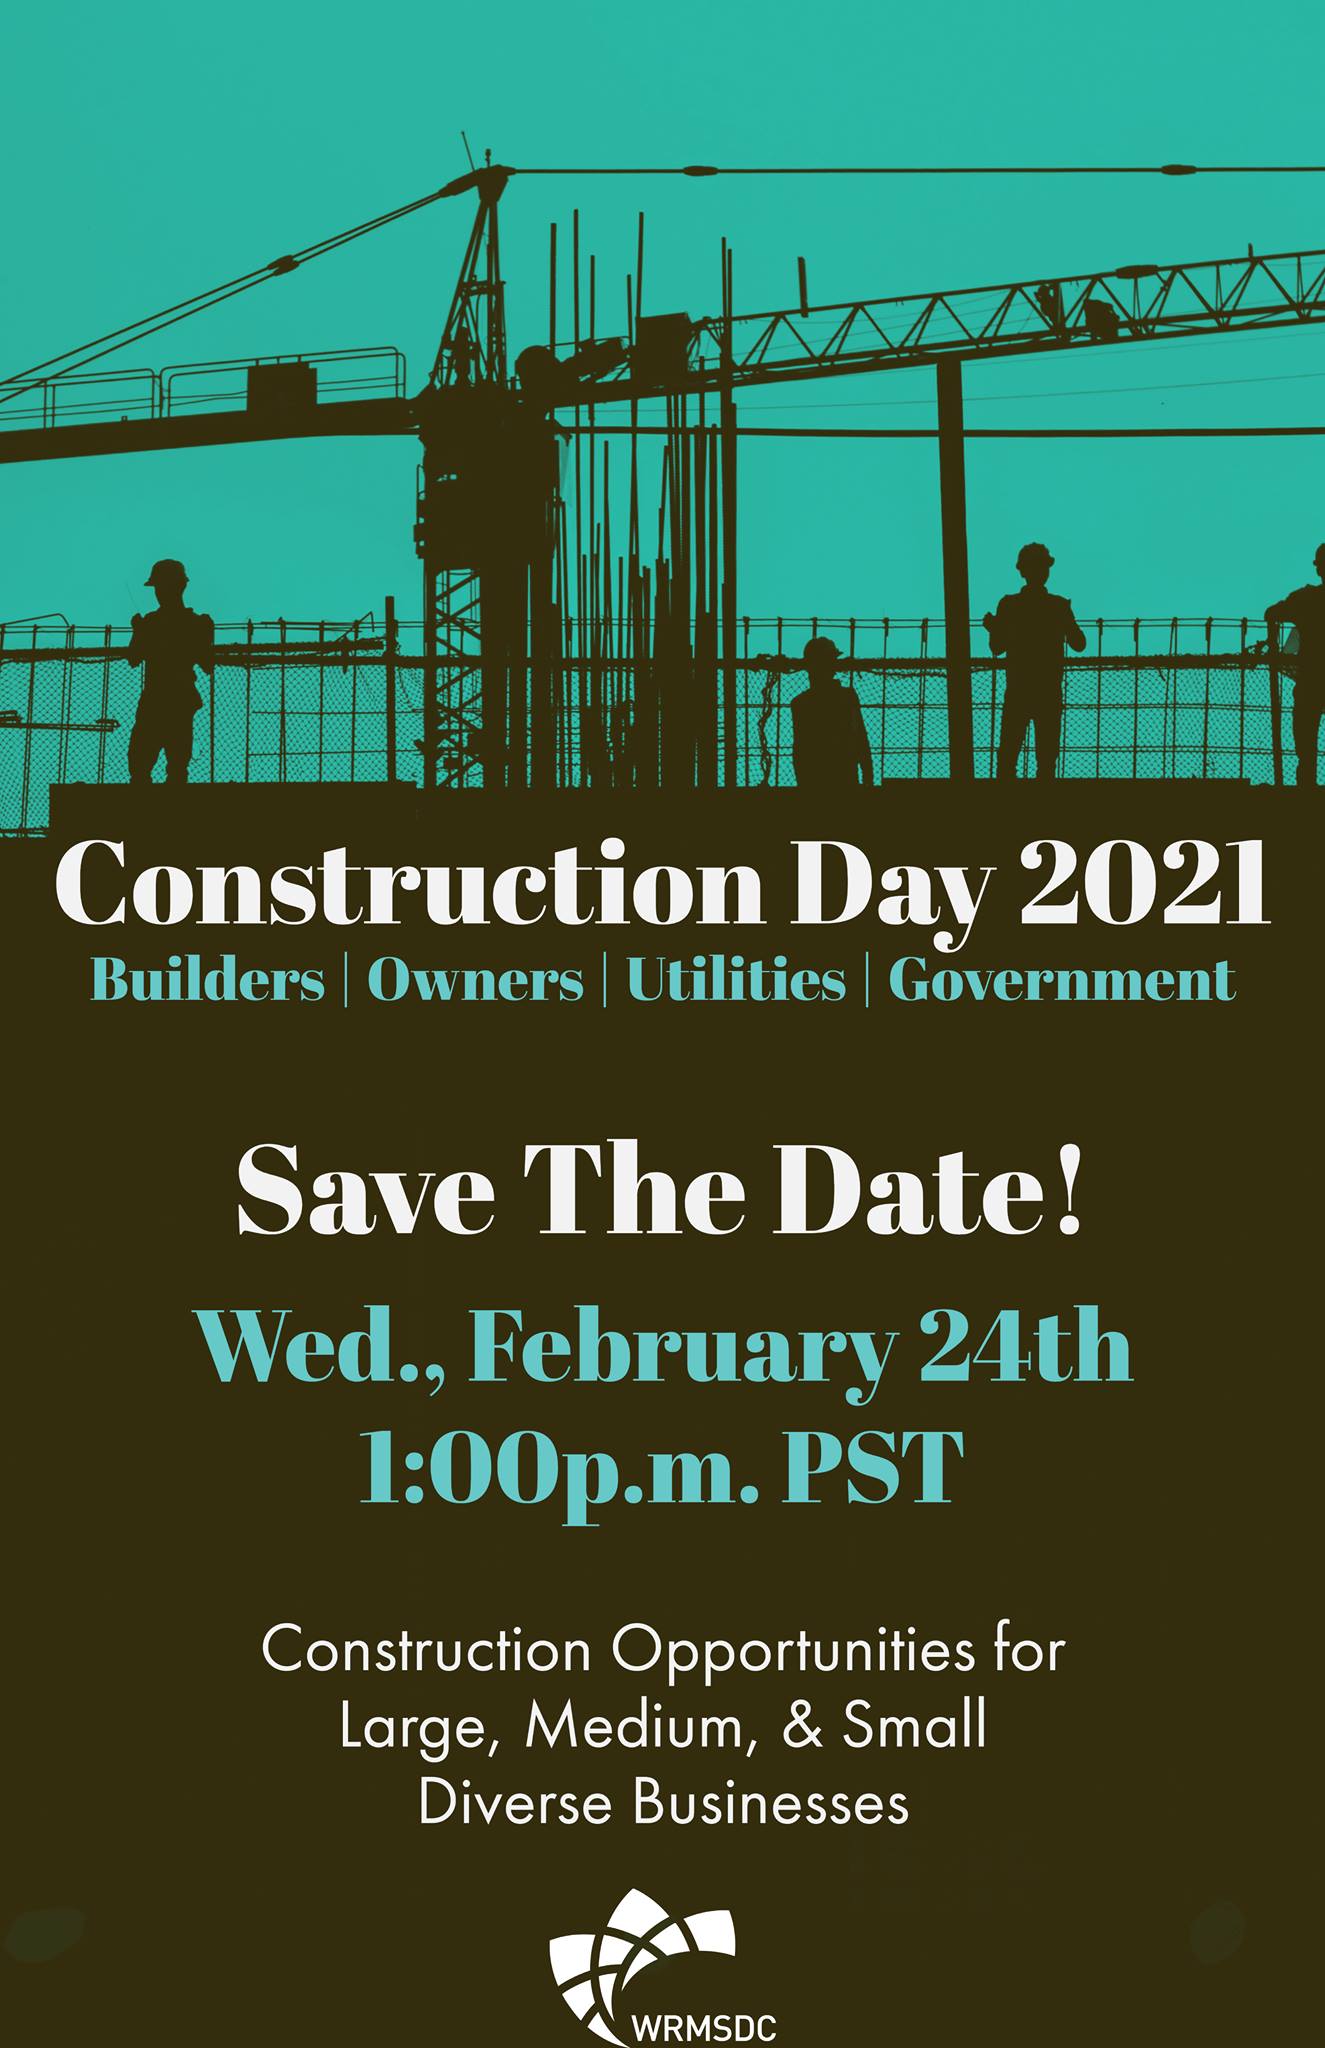 WRMSDC Construction Day Builders Owners Utilities Government